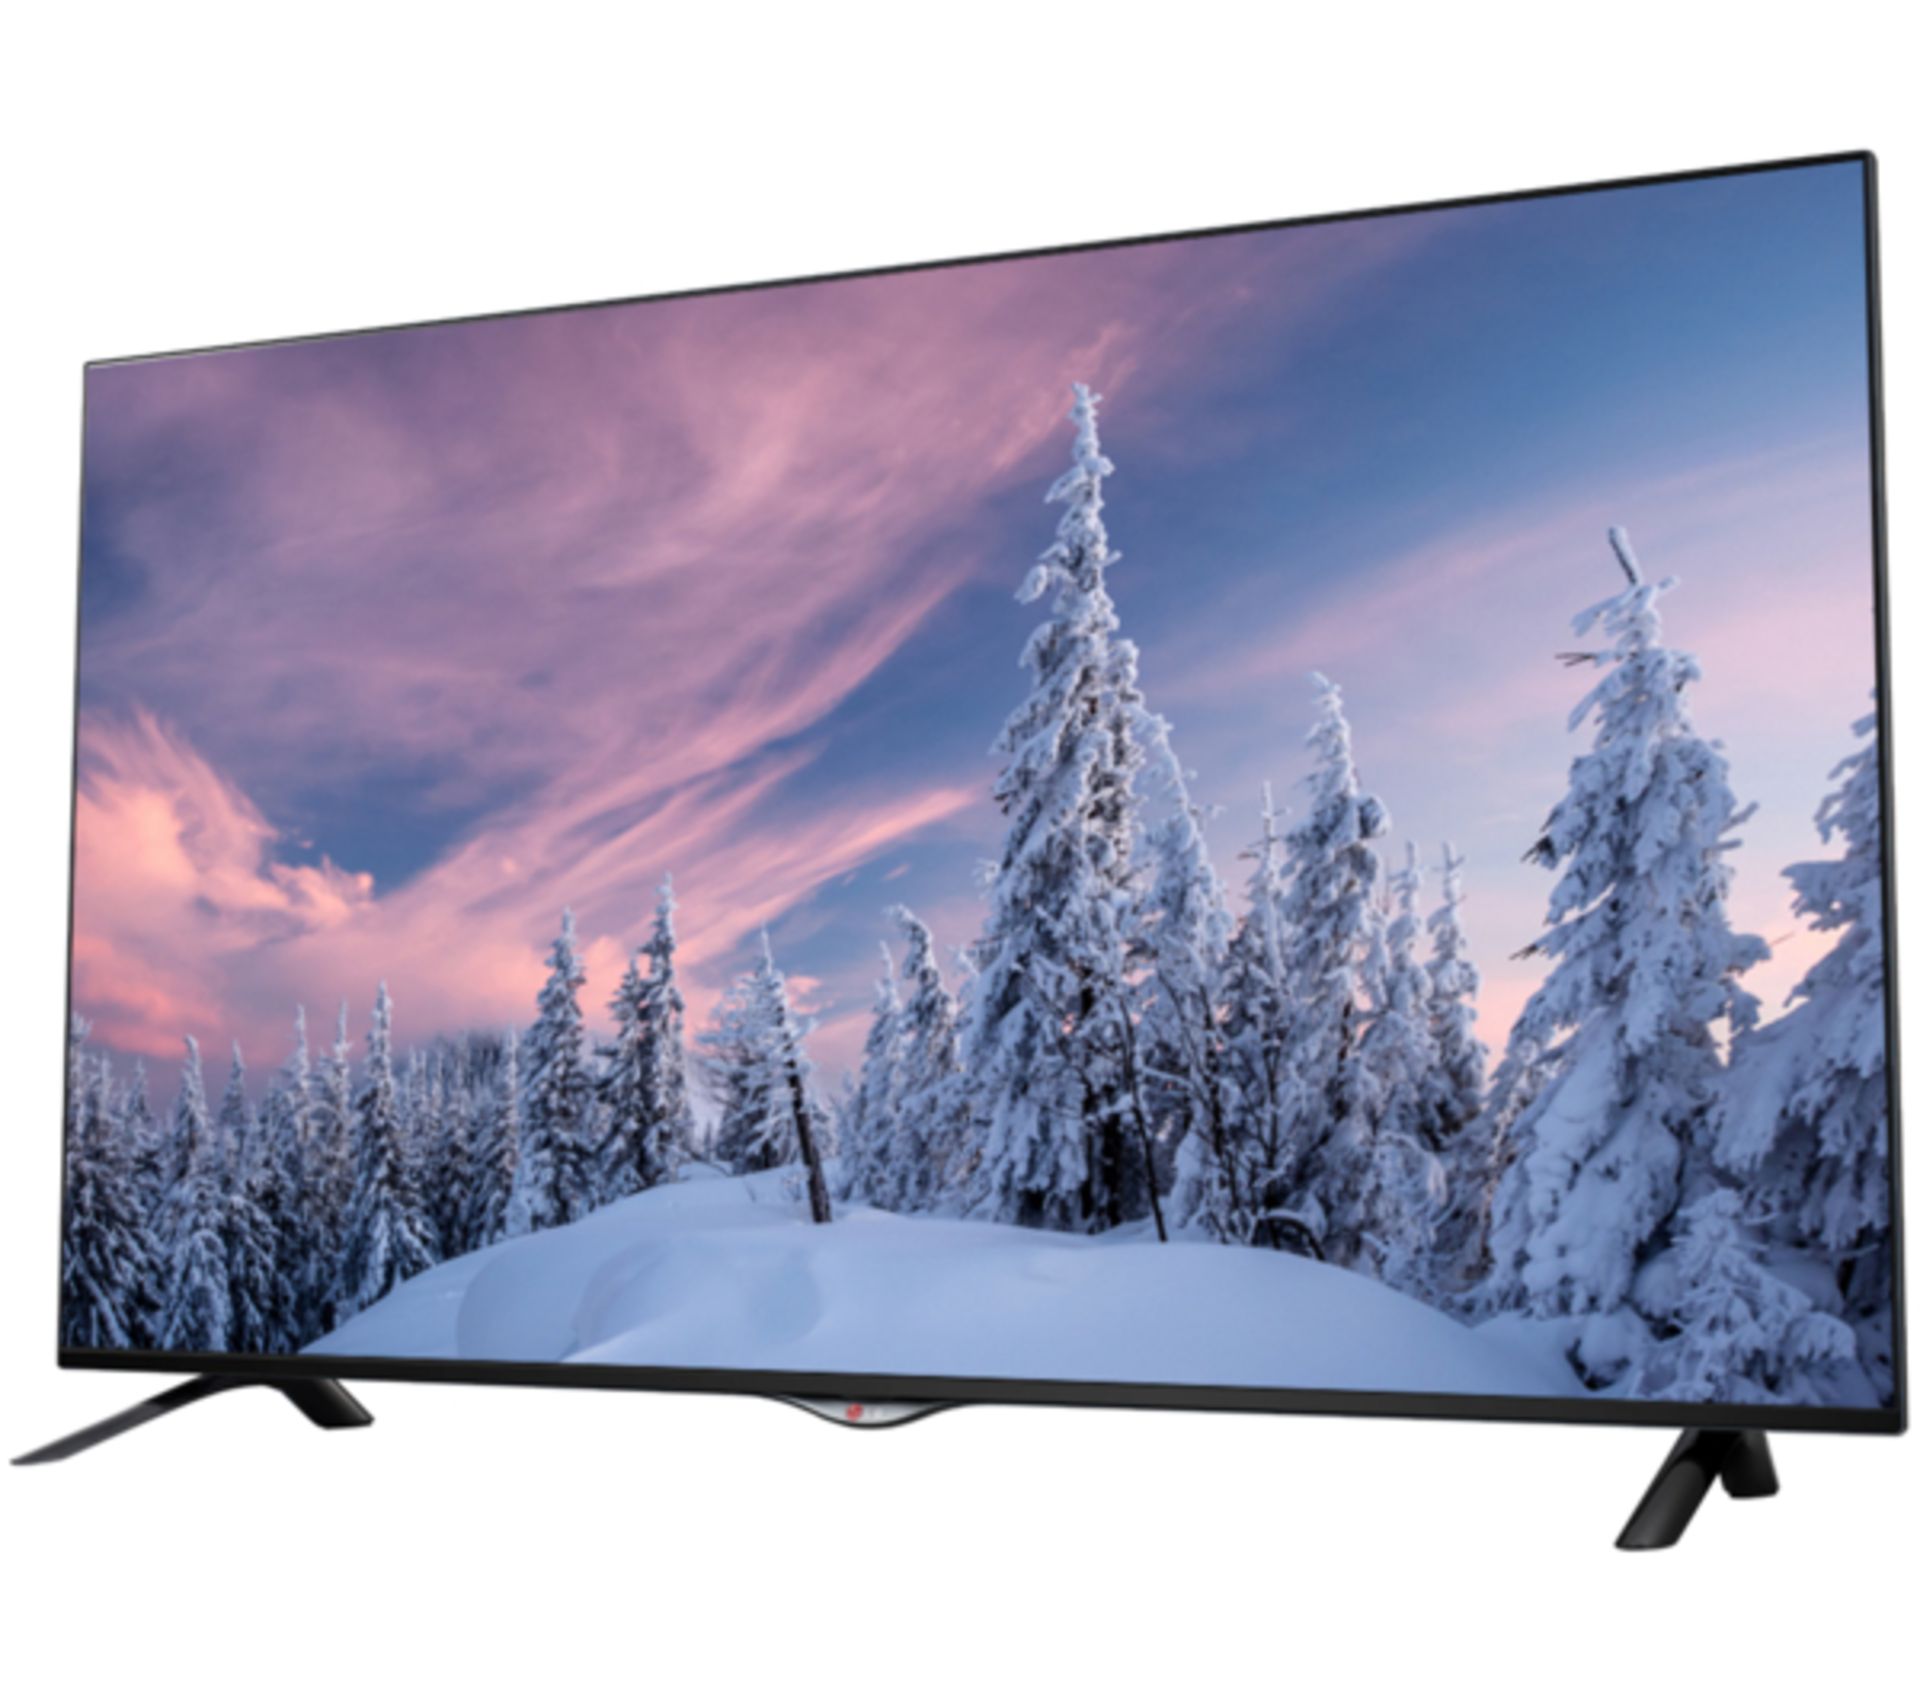 V Grade A LG 55" Widescreen UHD 4K LED LCD Smart TV With Freeview HD - Built In WI-FI - 3x HDMI